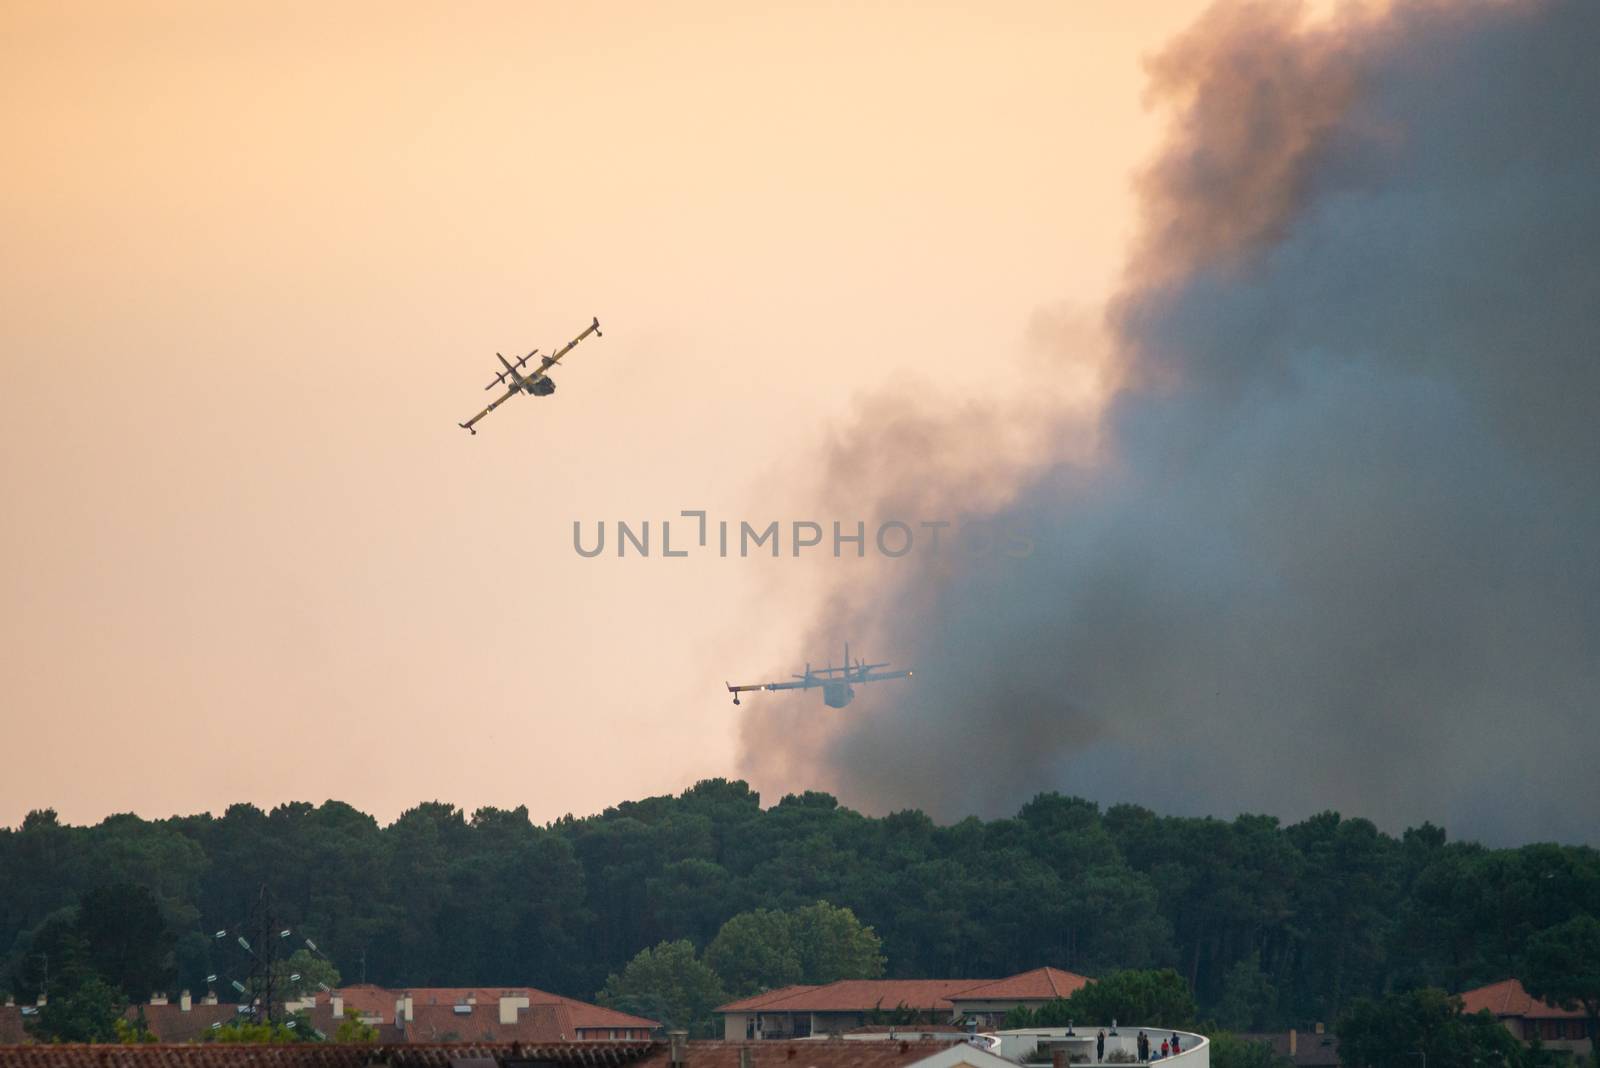 BAYONNE, FRANCE - 30 JULY, 2020: Two Canadair CL-415 from the French Securite Civile came from Marseille to help tackle the Chiberta forest fire in Anglet.